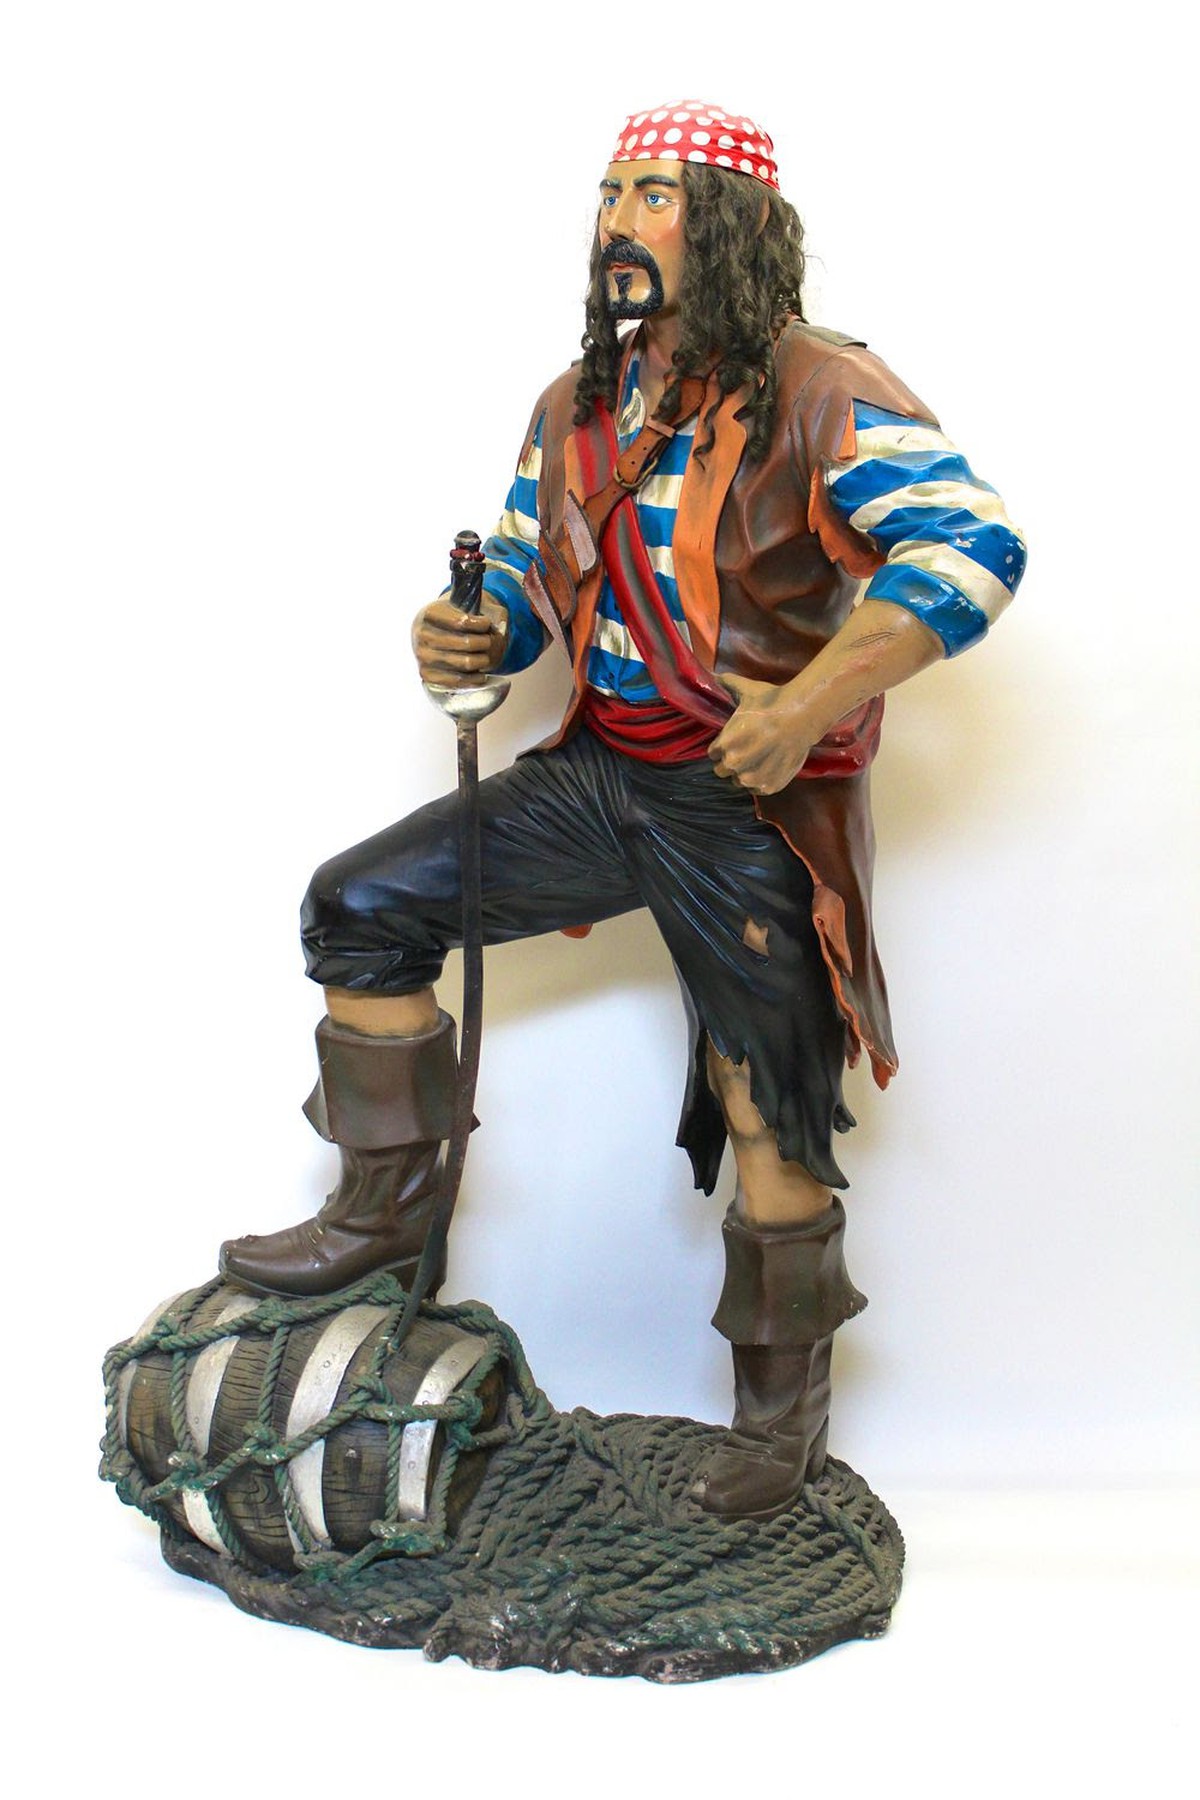 secondhand-prop-shop-pirate-6x-pirate-props-leicestershire